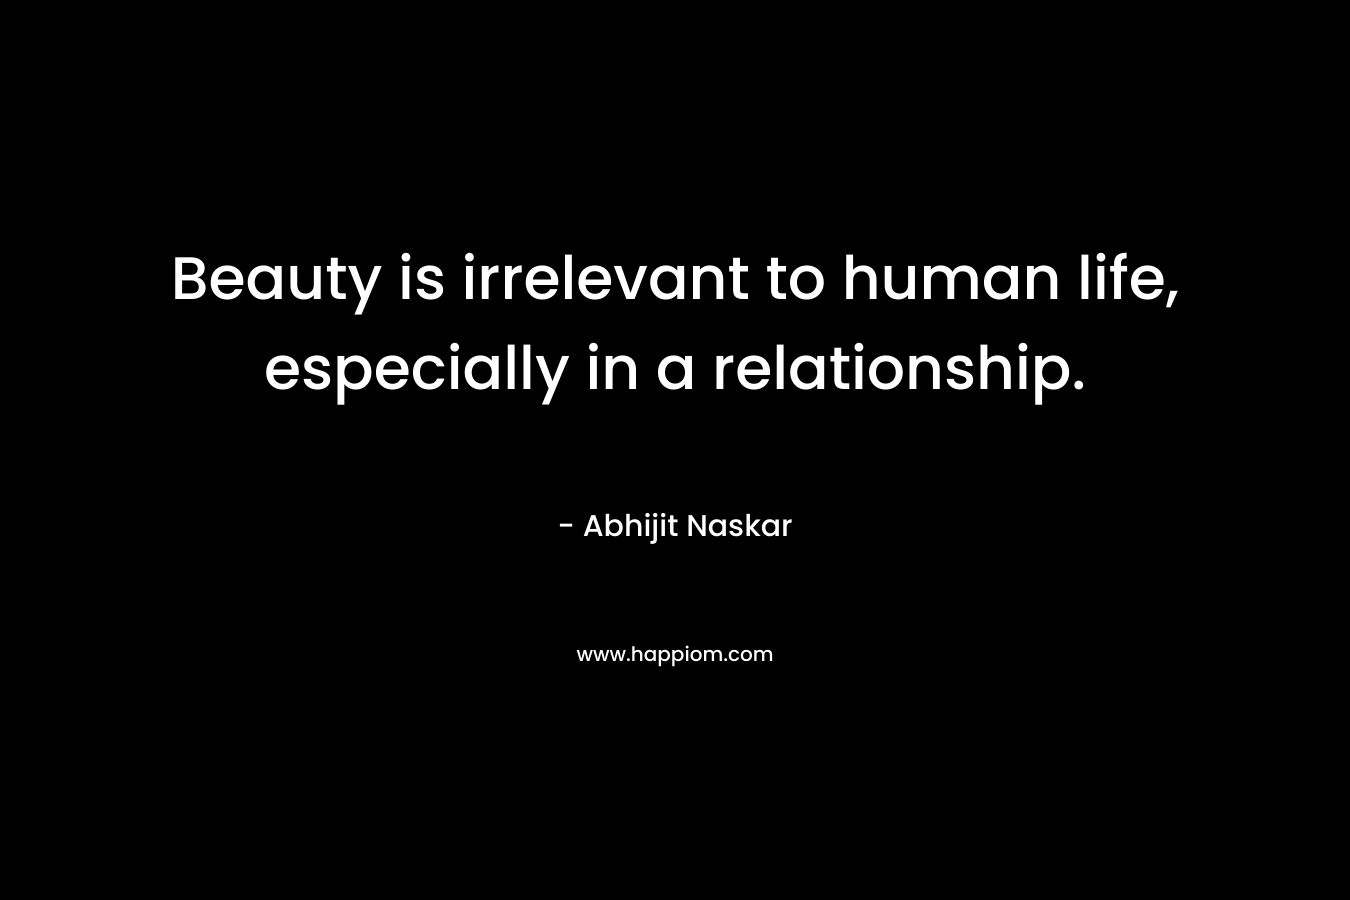 Beauty is irrelevant to human life, especially in a relationship.